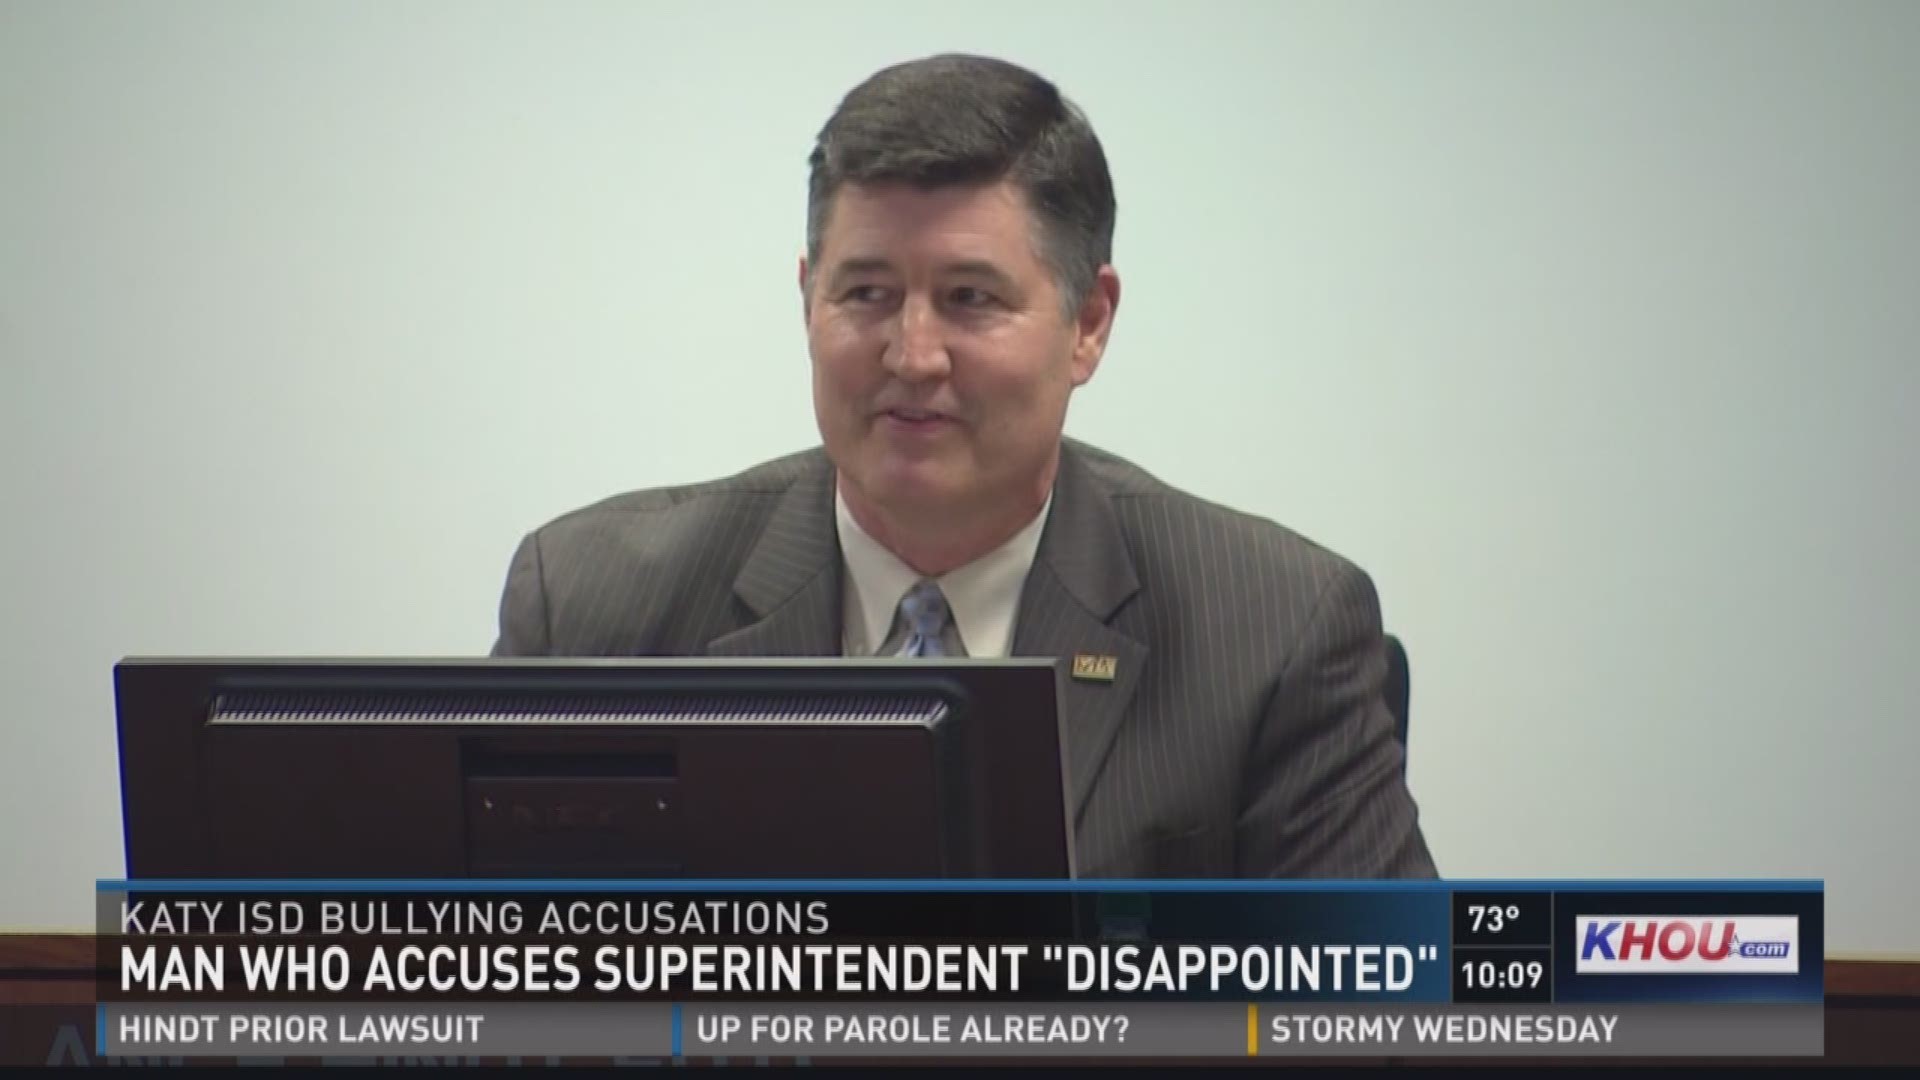 Greg Gay, the man who accused Superintendent Lance Hindt of being a bullying, says he wants more accountability from Katy ISD and the superintendent